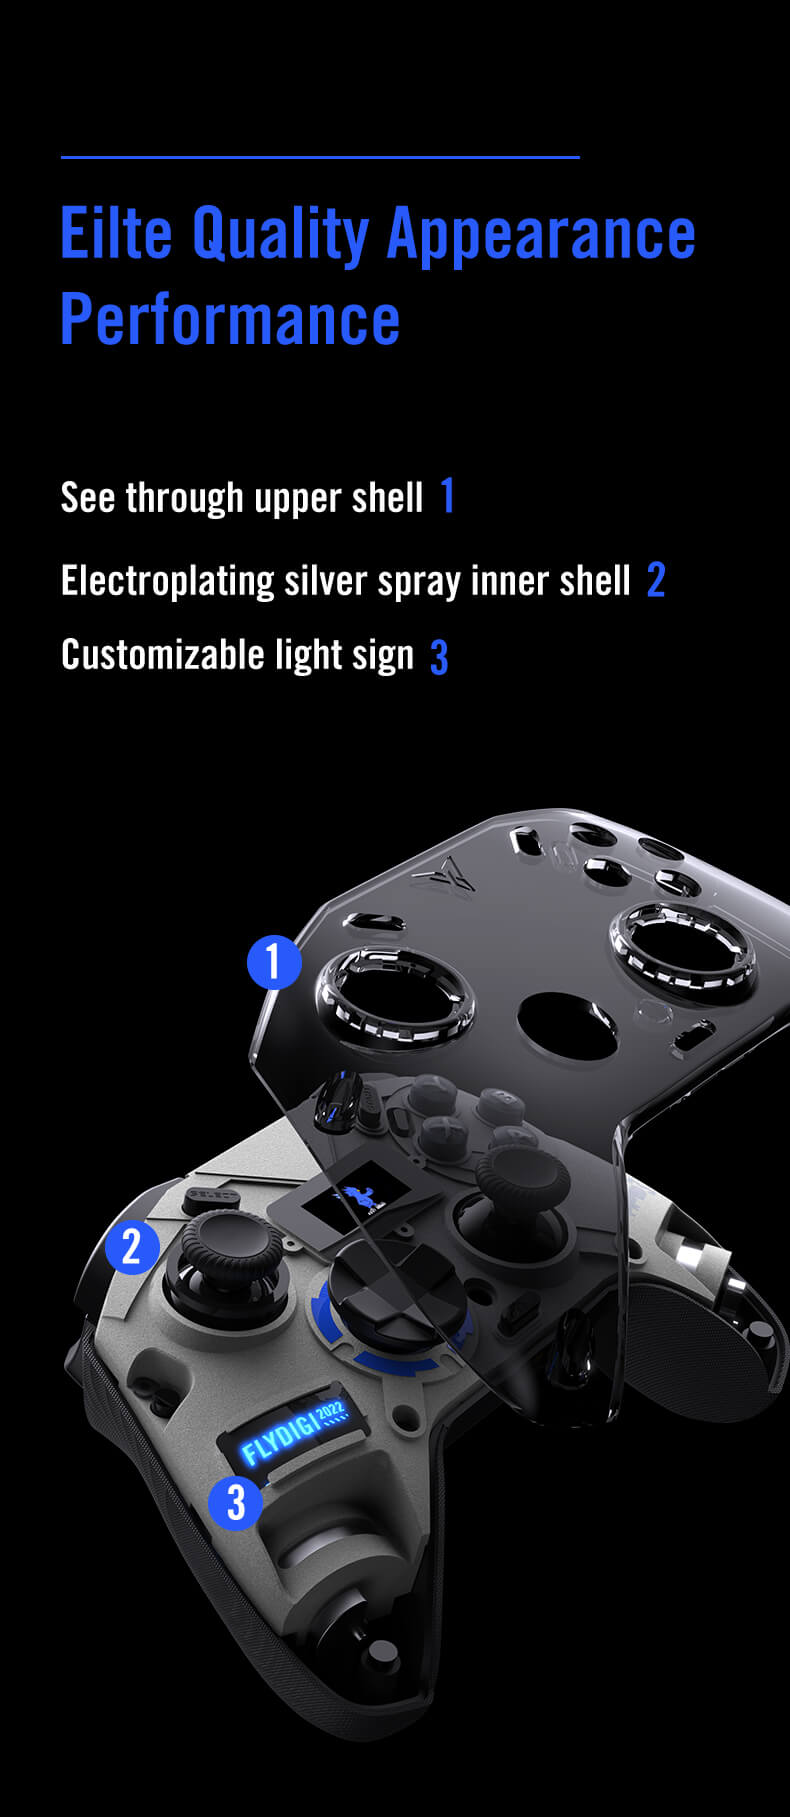 Flydigi Apex Series 3 Elite Game Controller for Nintendo Switch Windows Android for MFi Apple Arcade Games Cloud Gaming Steam Six-axis Somatosensory Vibration Gamepad